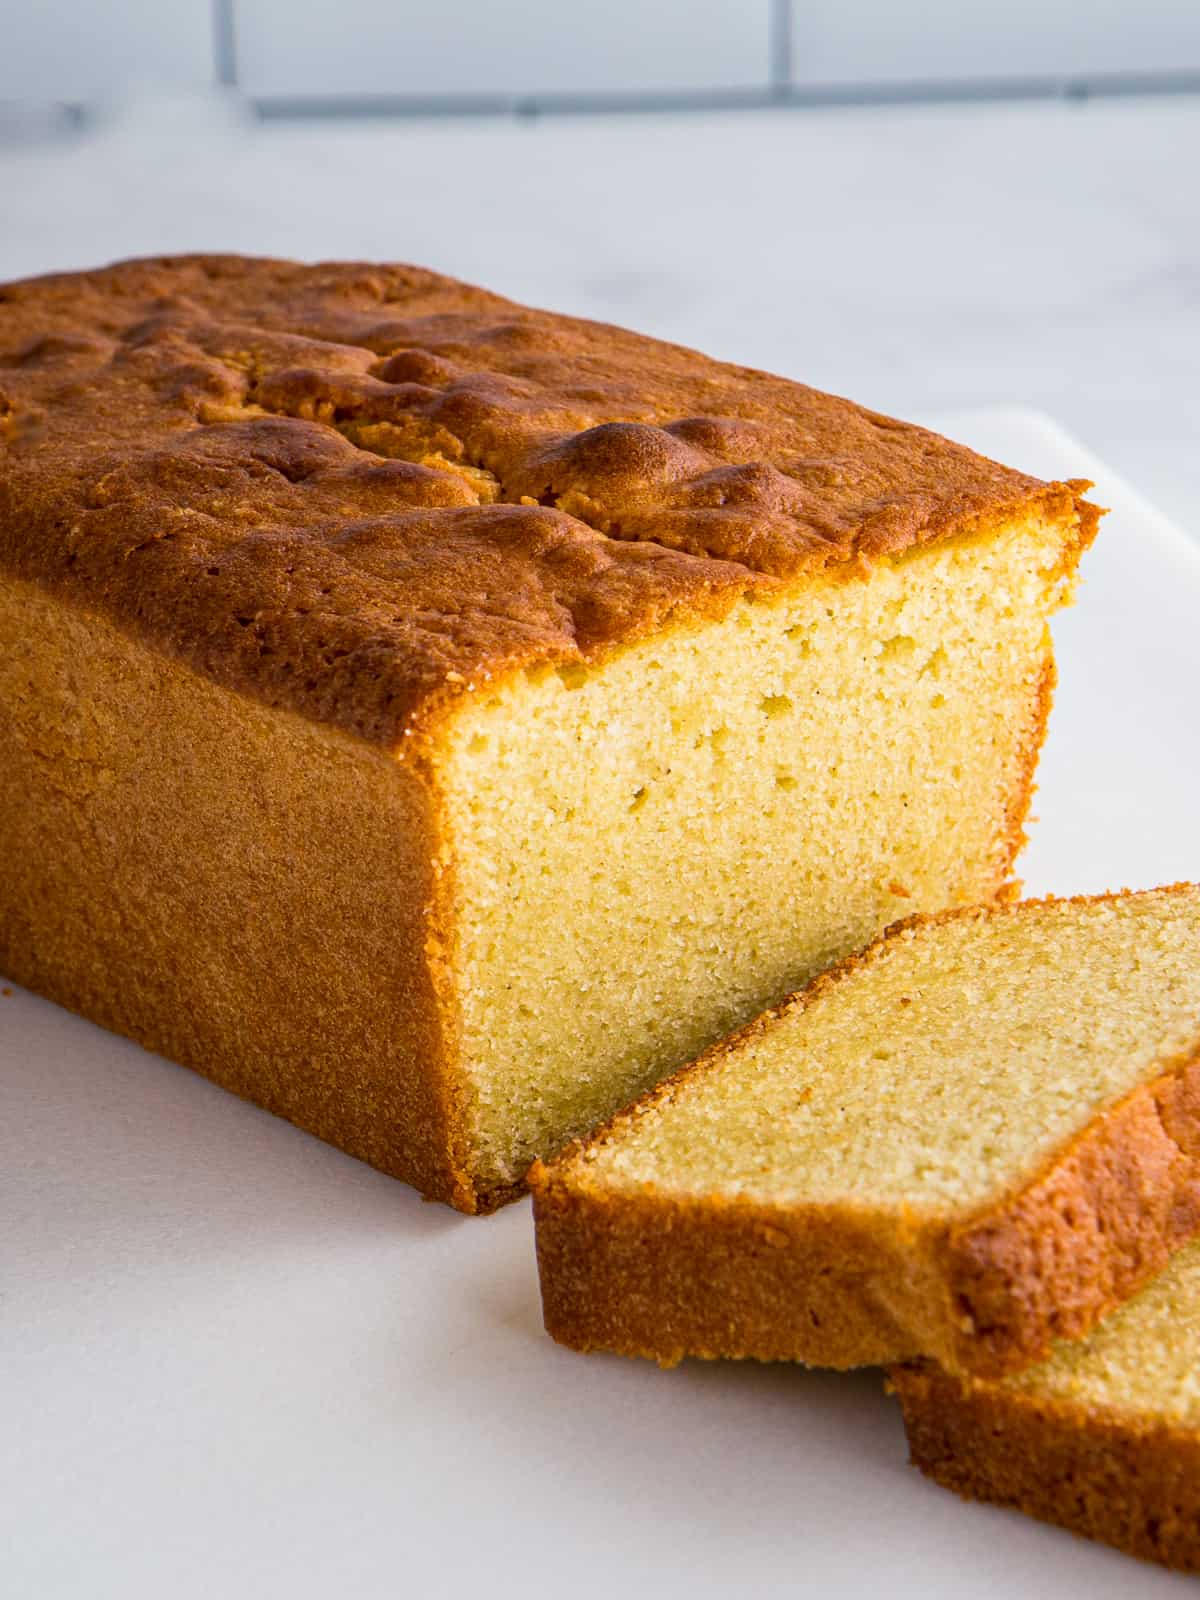 Baked gluten-free pound cake with two slices cut from it.